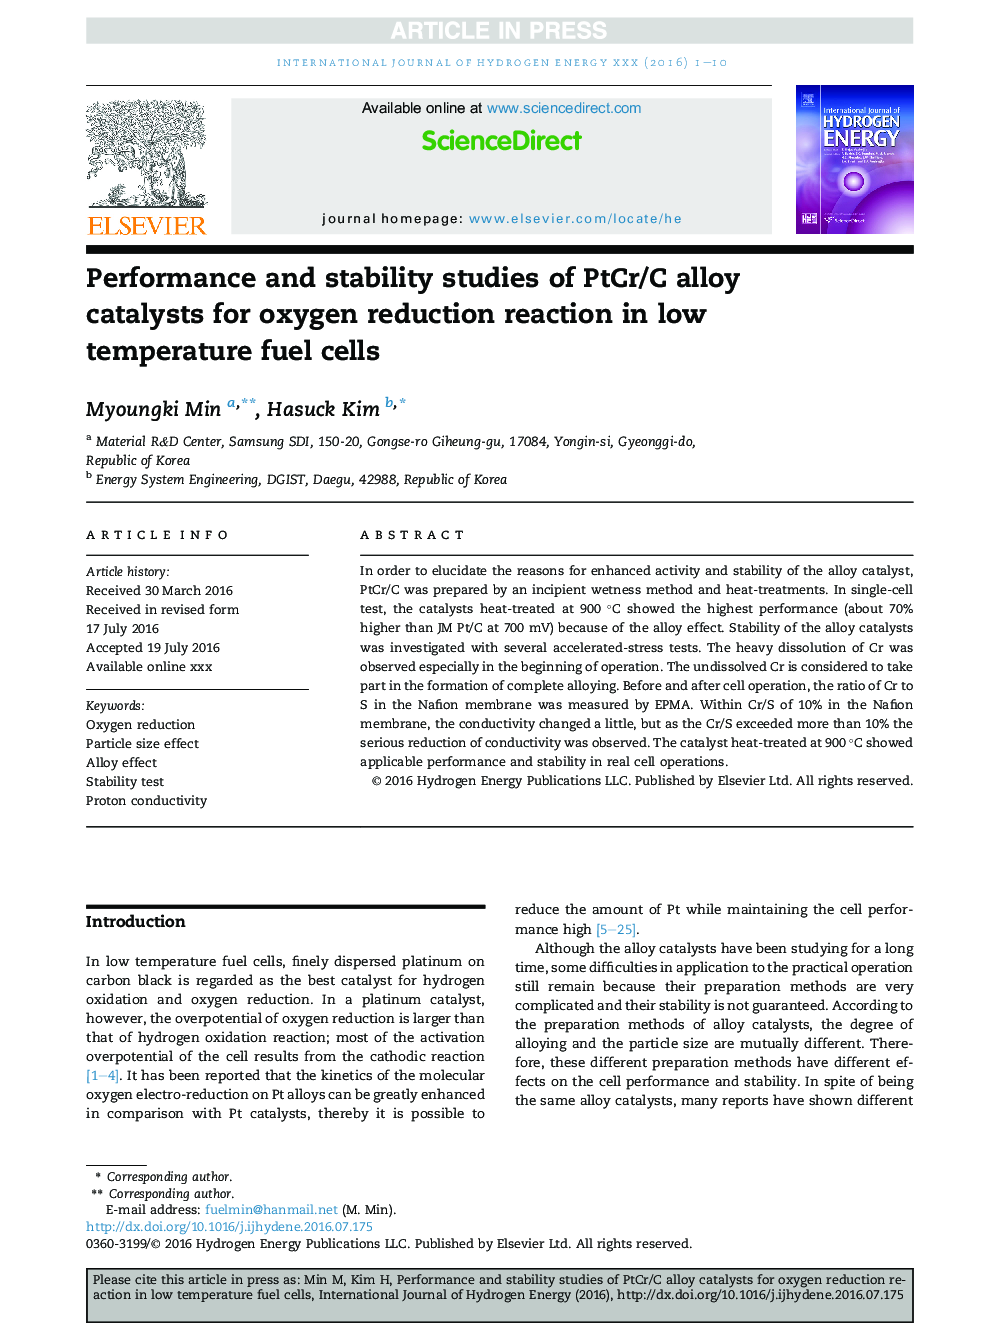 Performance and stability studies of PtCr/C alloy catalysts for oxygen reduction reaction in low temperature fuel cells